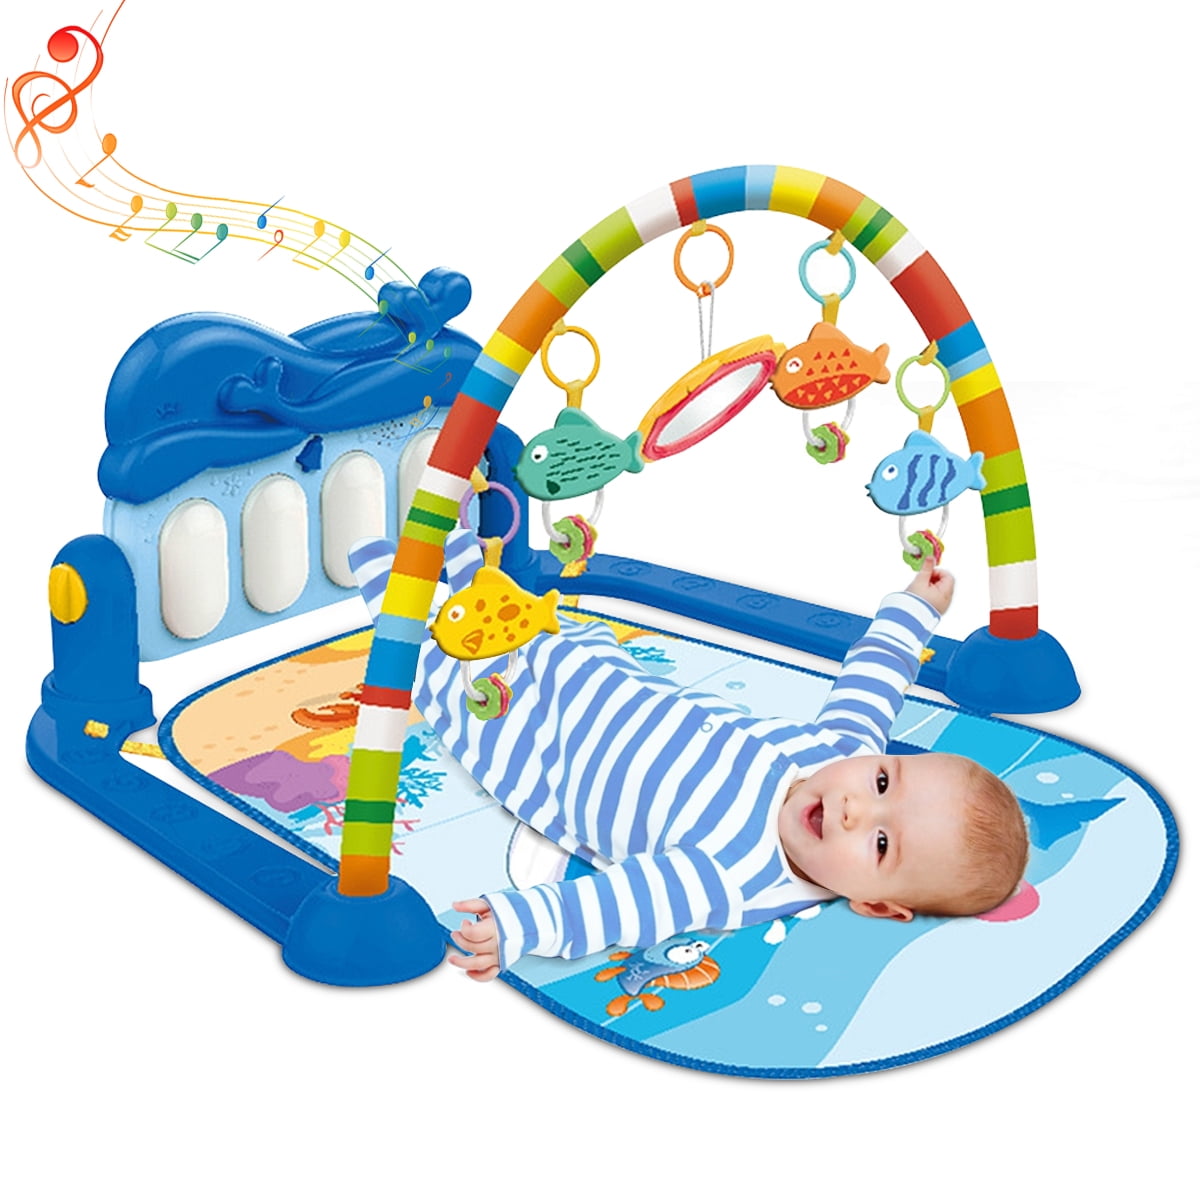 Baby Play Mats Gym Flashing Dance Lights and Toys for Babies 0+ Crawling Mat Infant Activity Center for Newborns Kick Piano Large Baby Game Pad with Pedal Piano Music Fitness Rack Green 